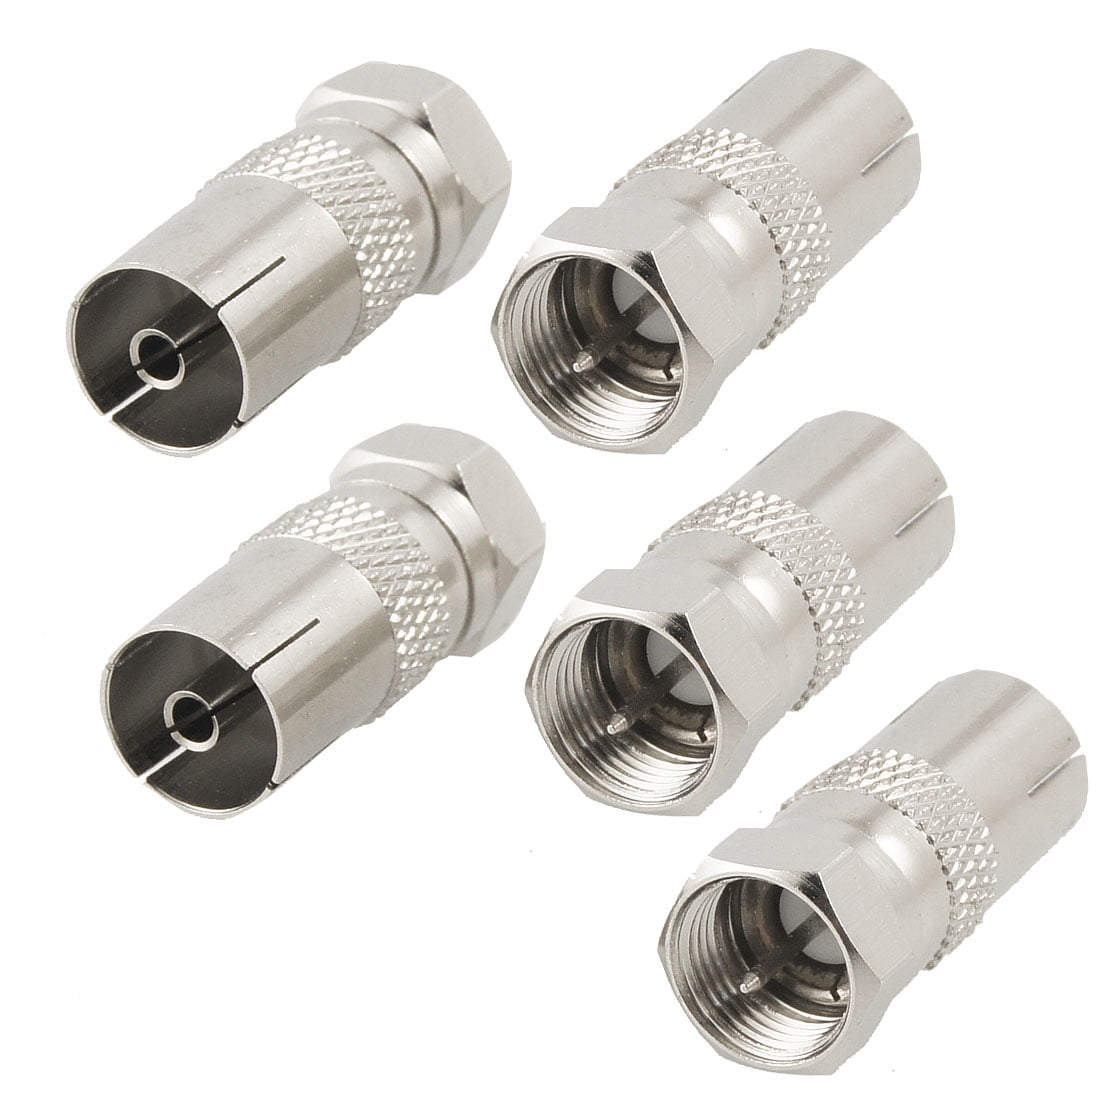 Ancable 5-Pack F-Type Male Plug to BNC Female Jack RF Radio Antenna Coax Adapter